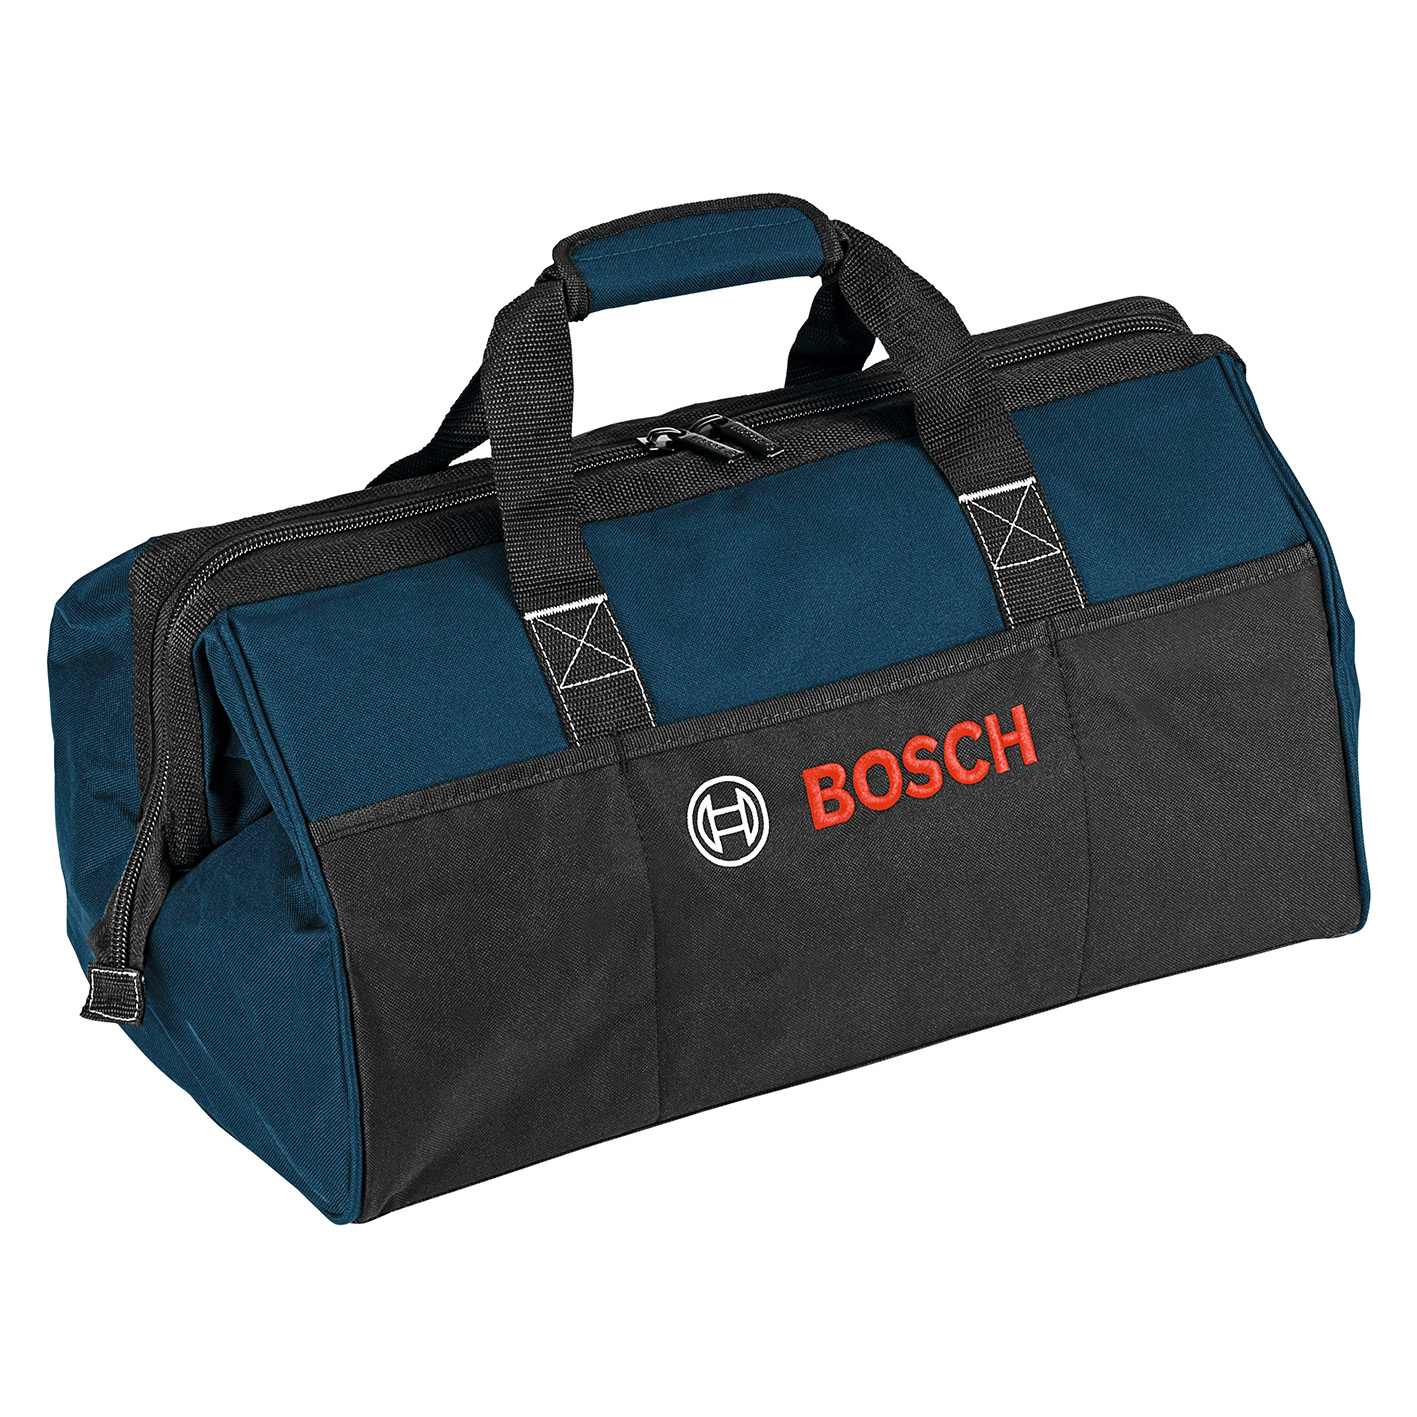 Bosch Professional Tool Bag Freedom Concept available at the Blea Store